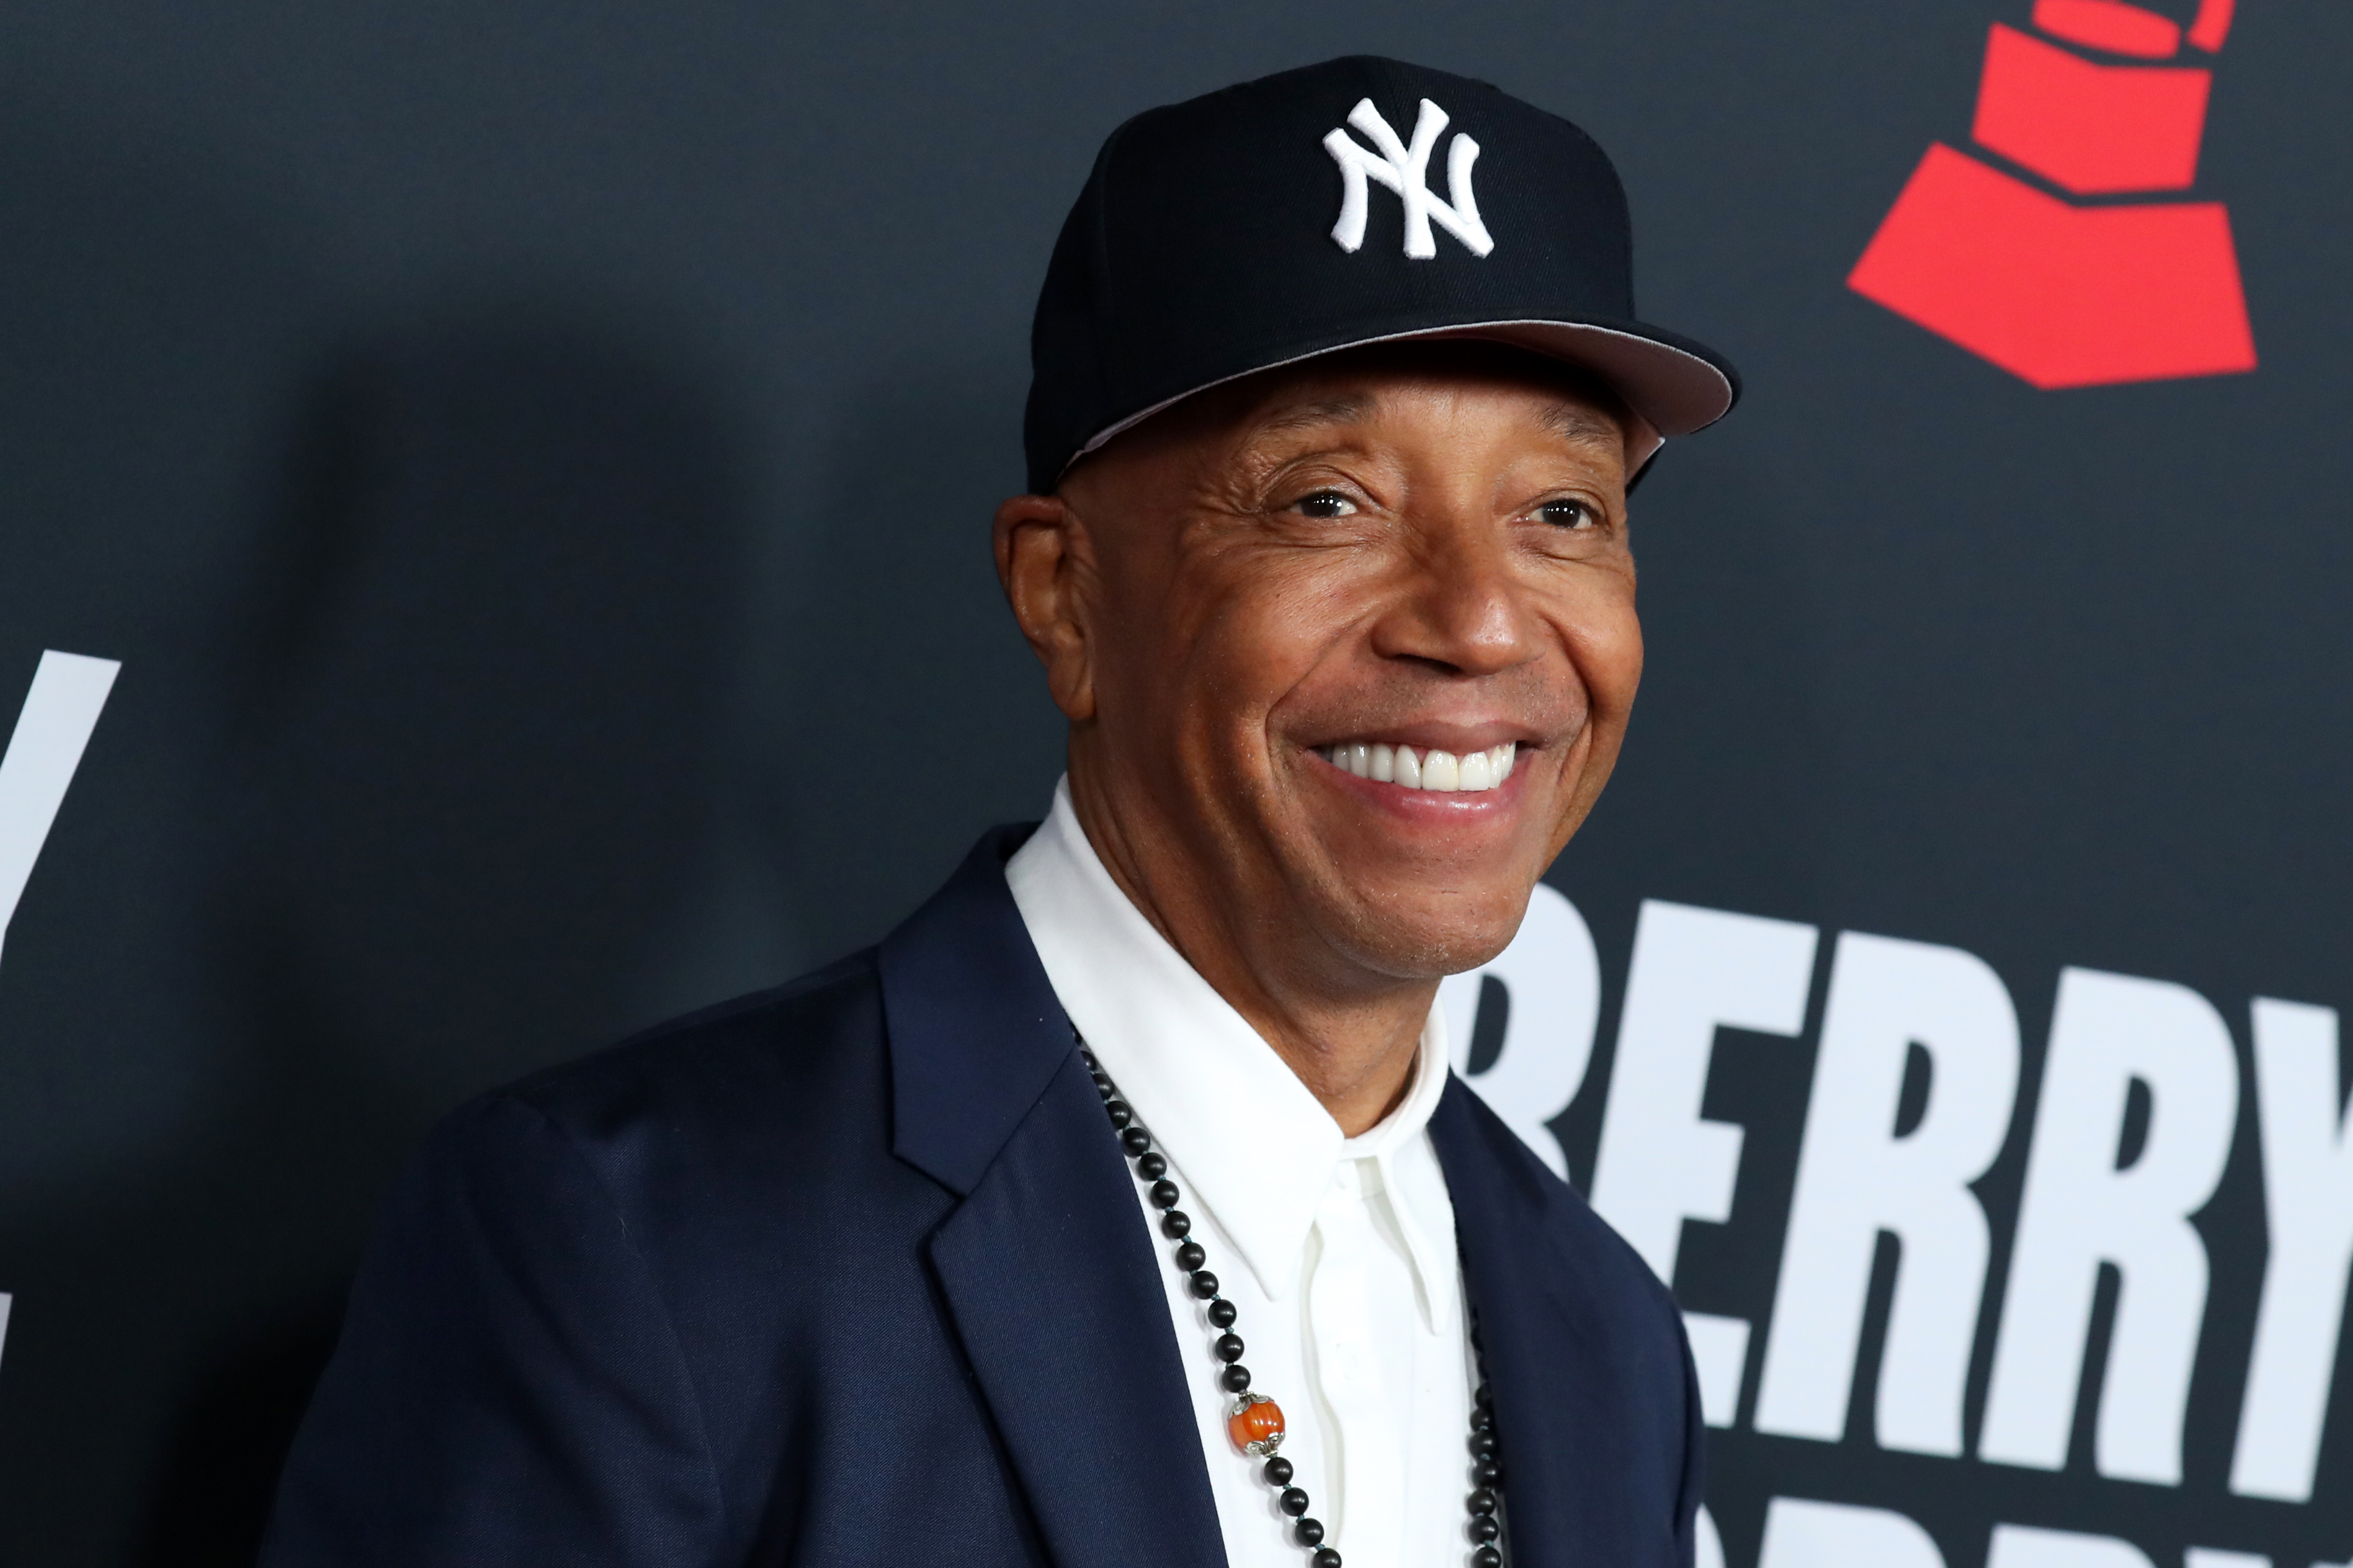 Russell Simmons Net Worth How Much Money Does He Make? In Touch Weekly